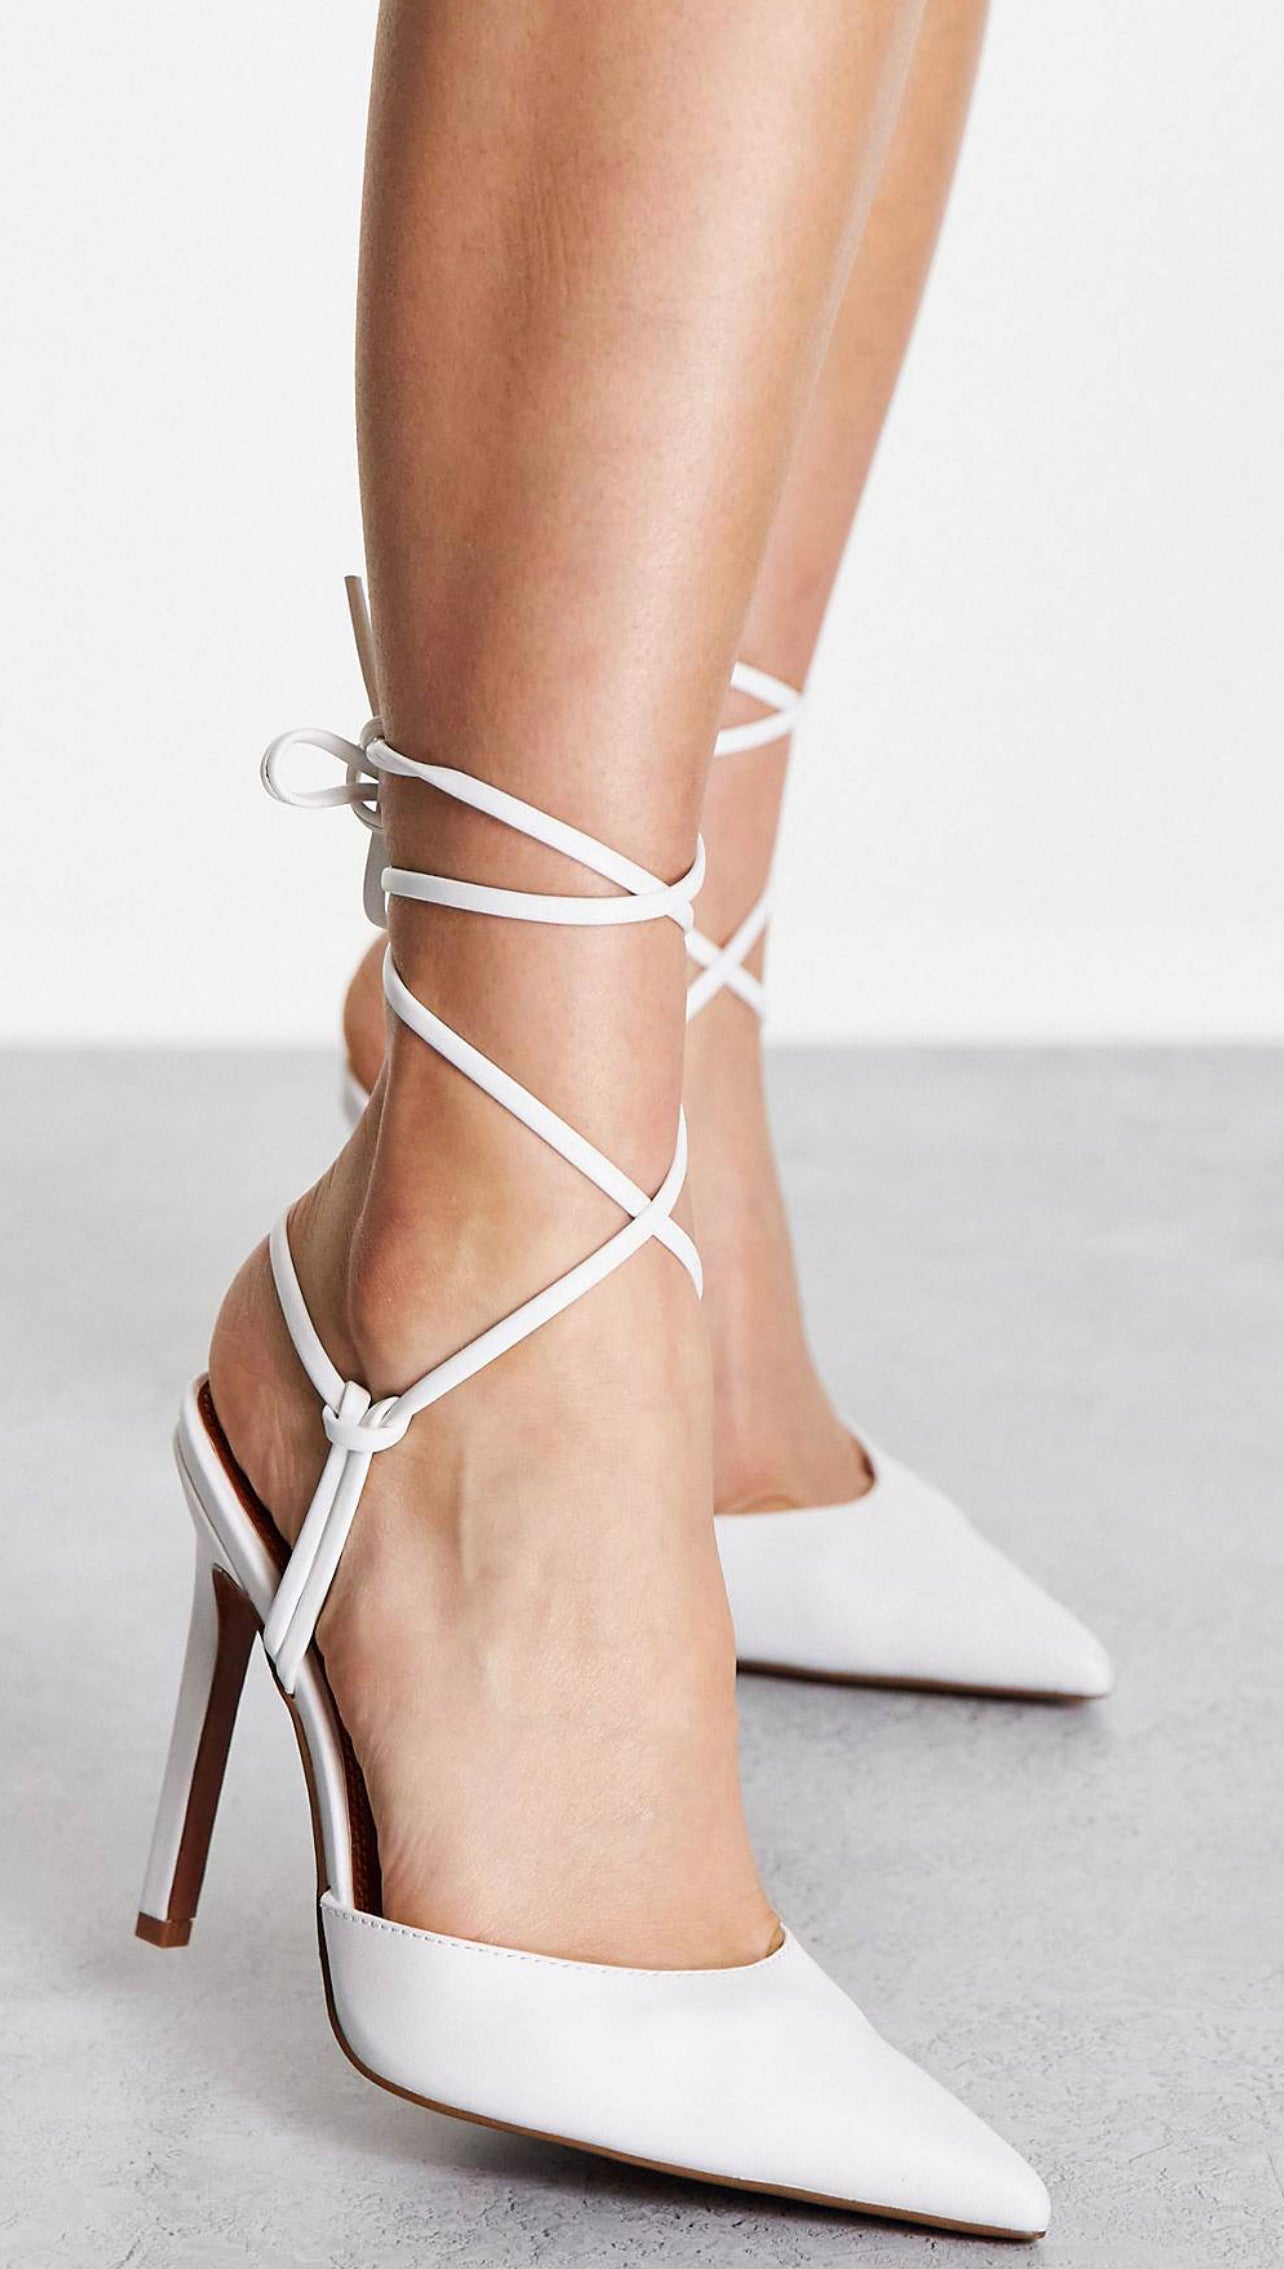 ASOS DESIGN PRIZE TIE LEG HIGH HEELED SHOES IN WHITE